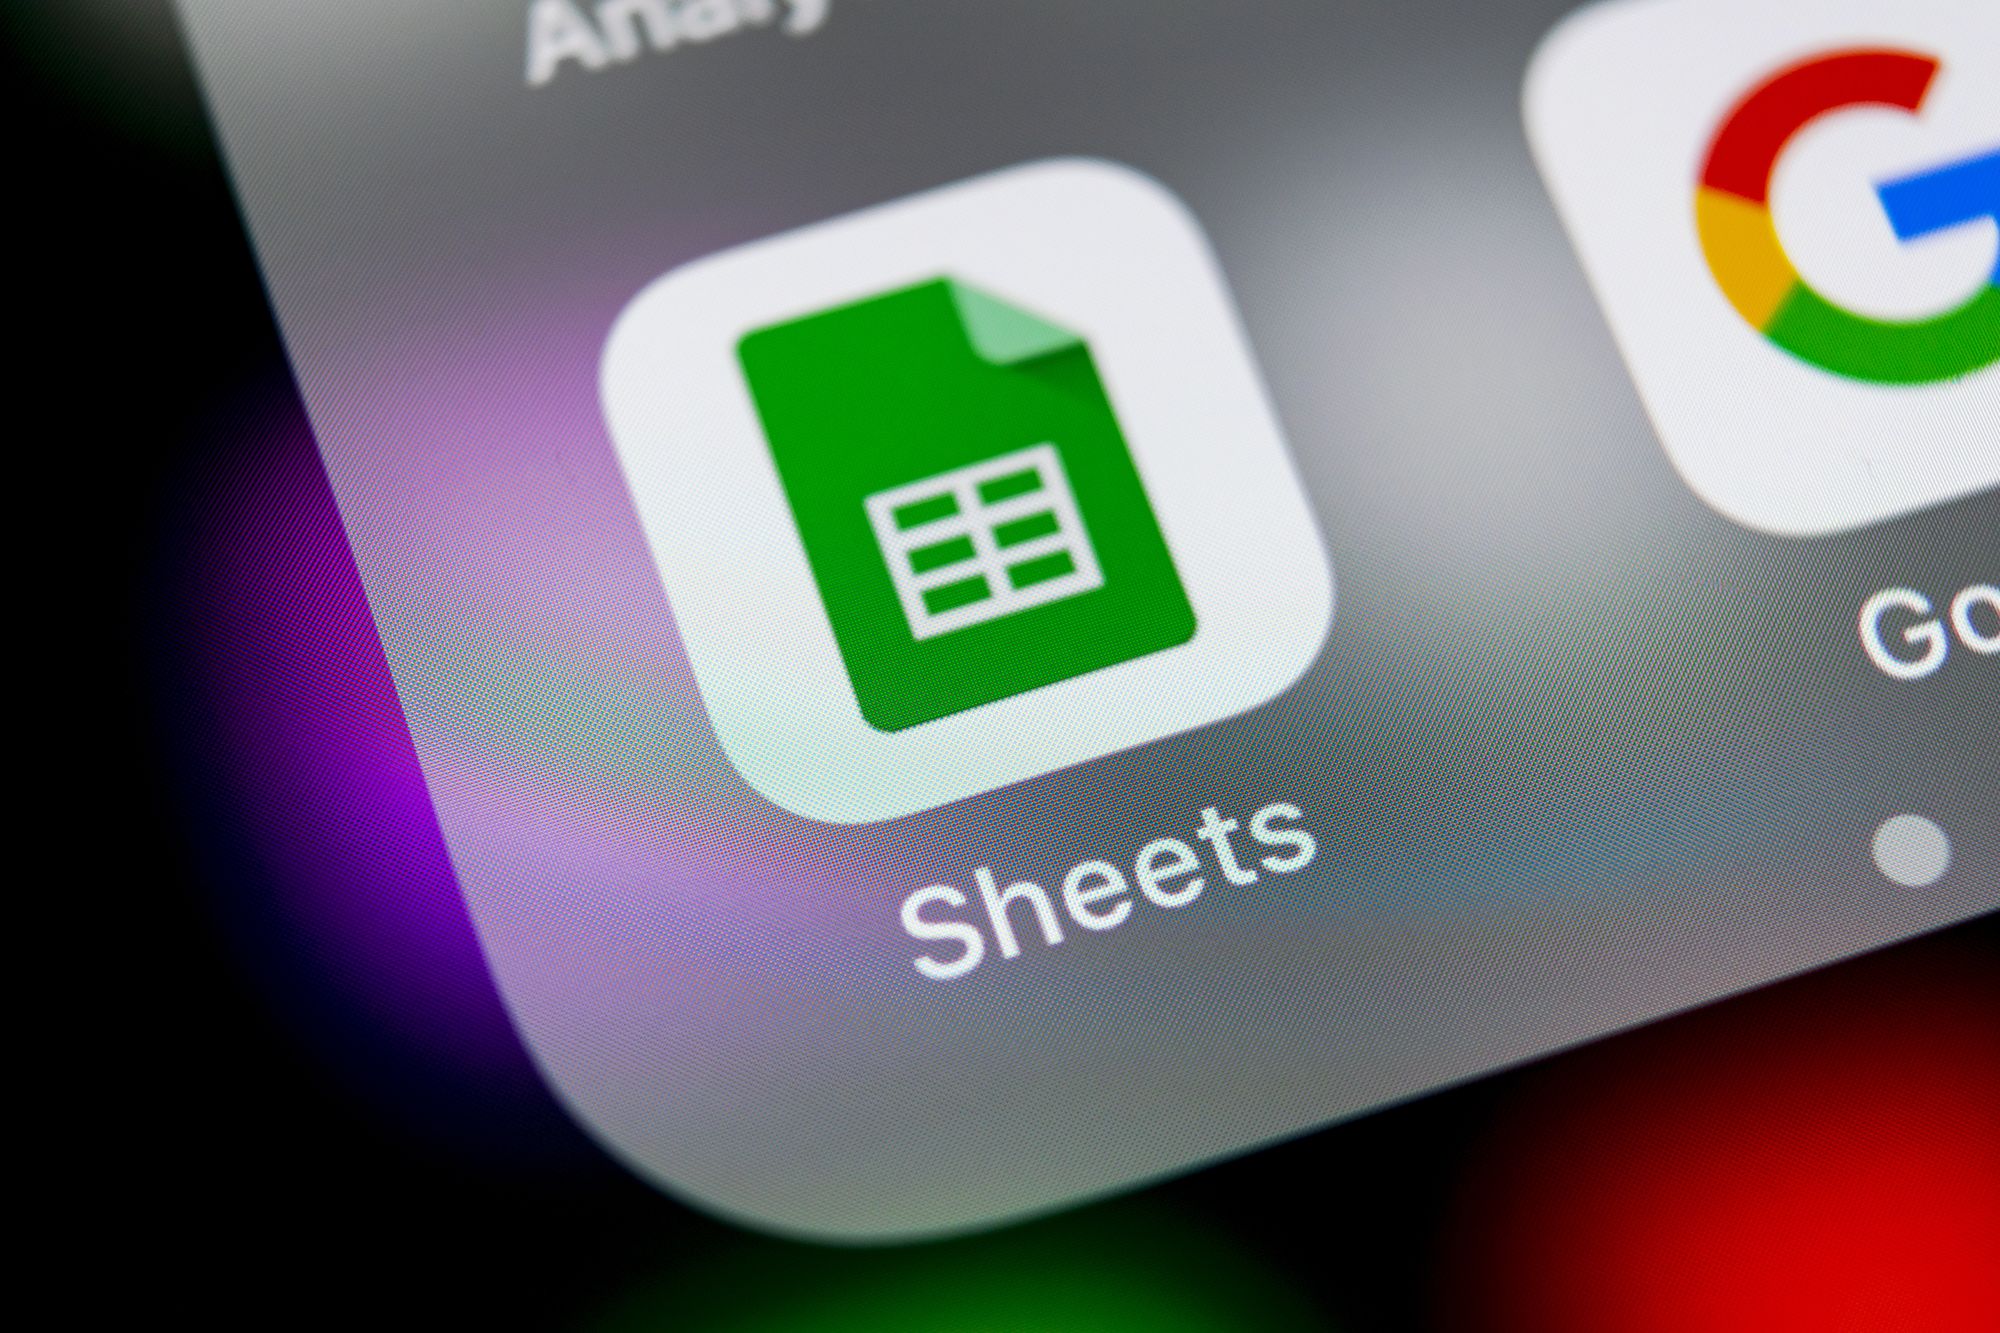 Google Spreadsheets: From Basics to Advanced!